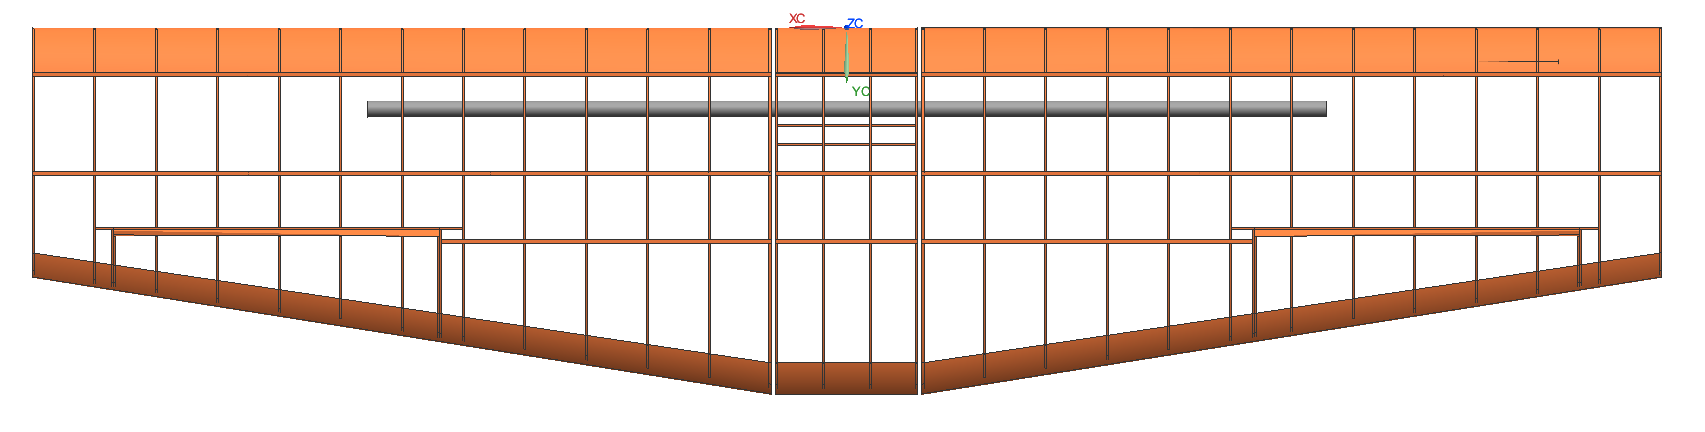 Structural layout consists of a basic rib and spar configuration.